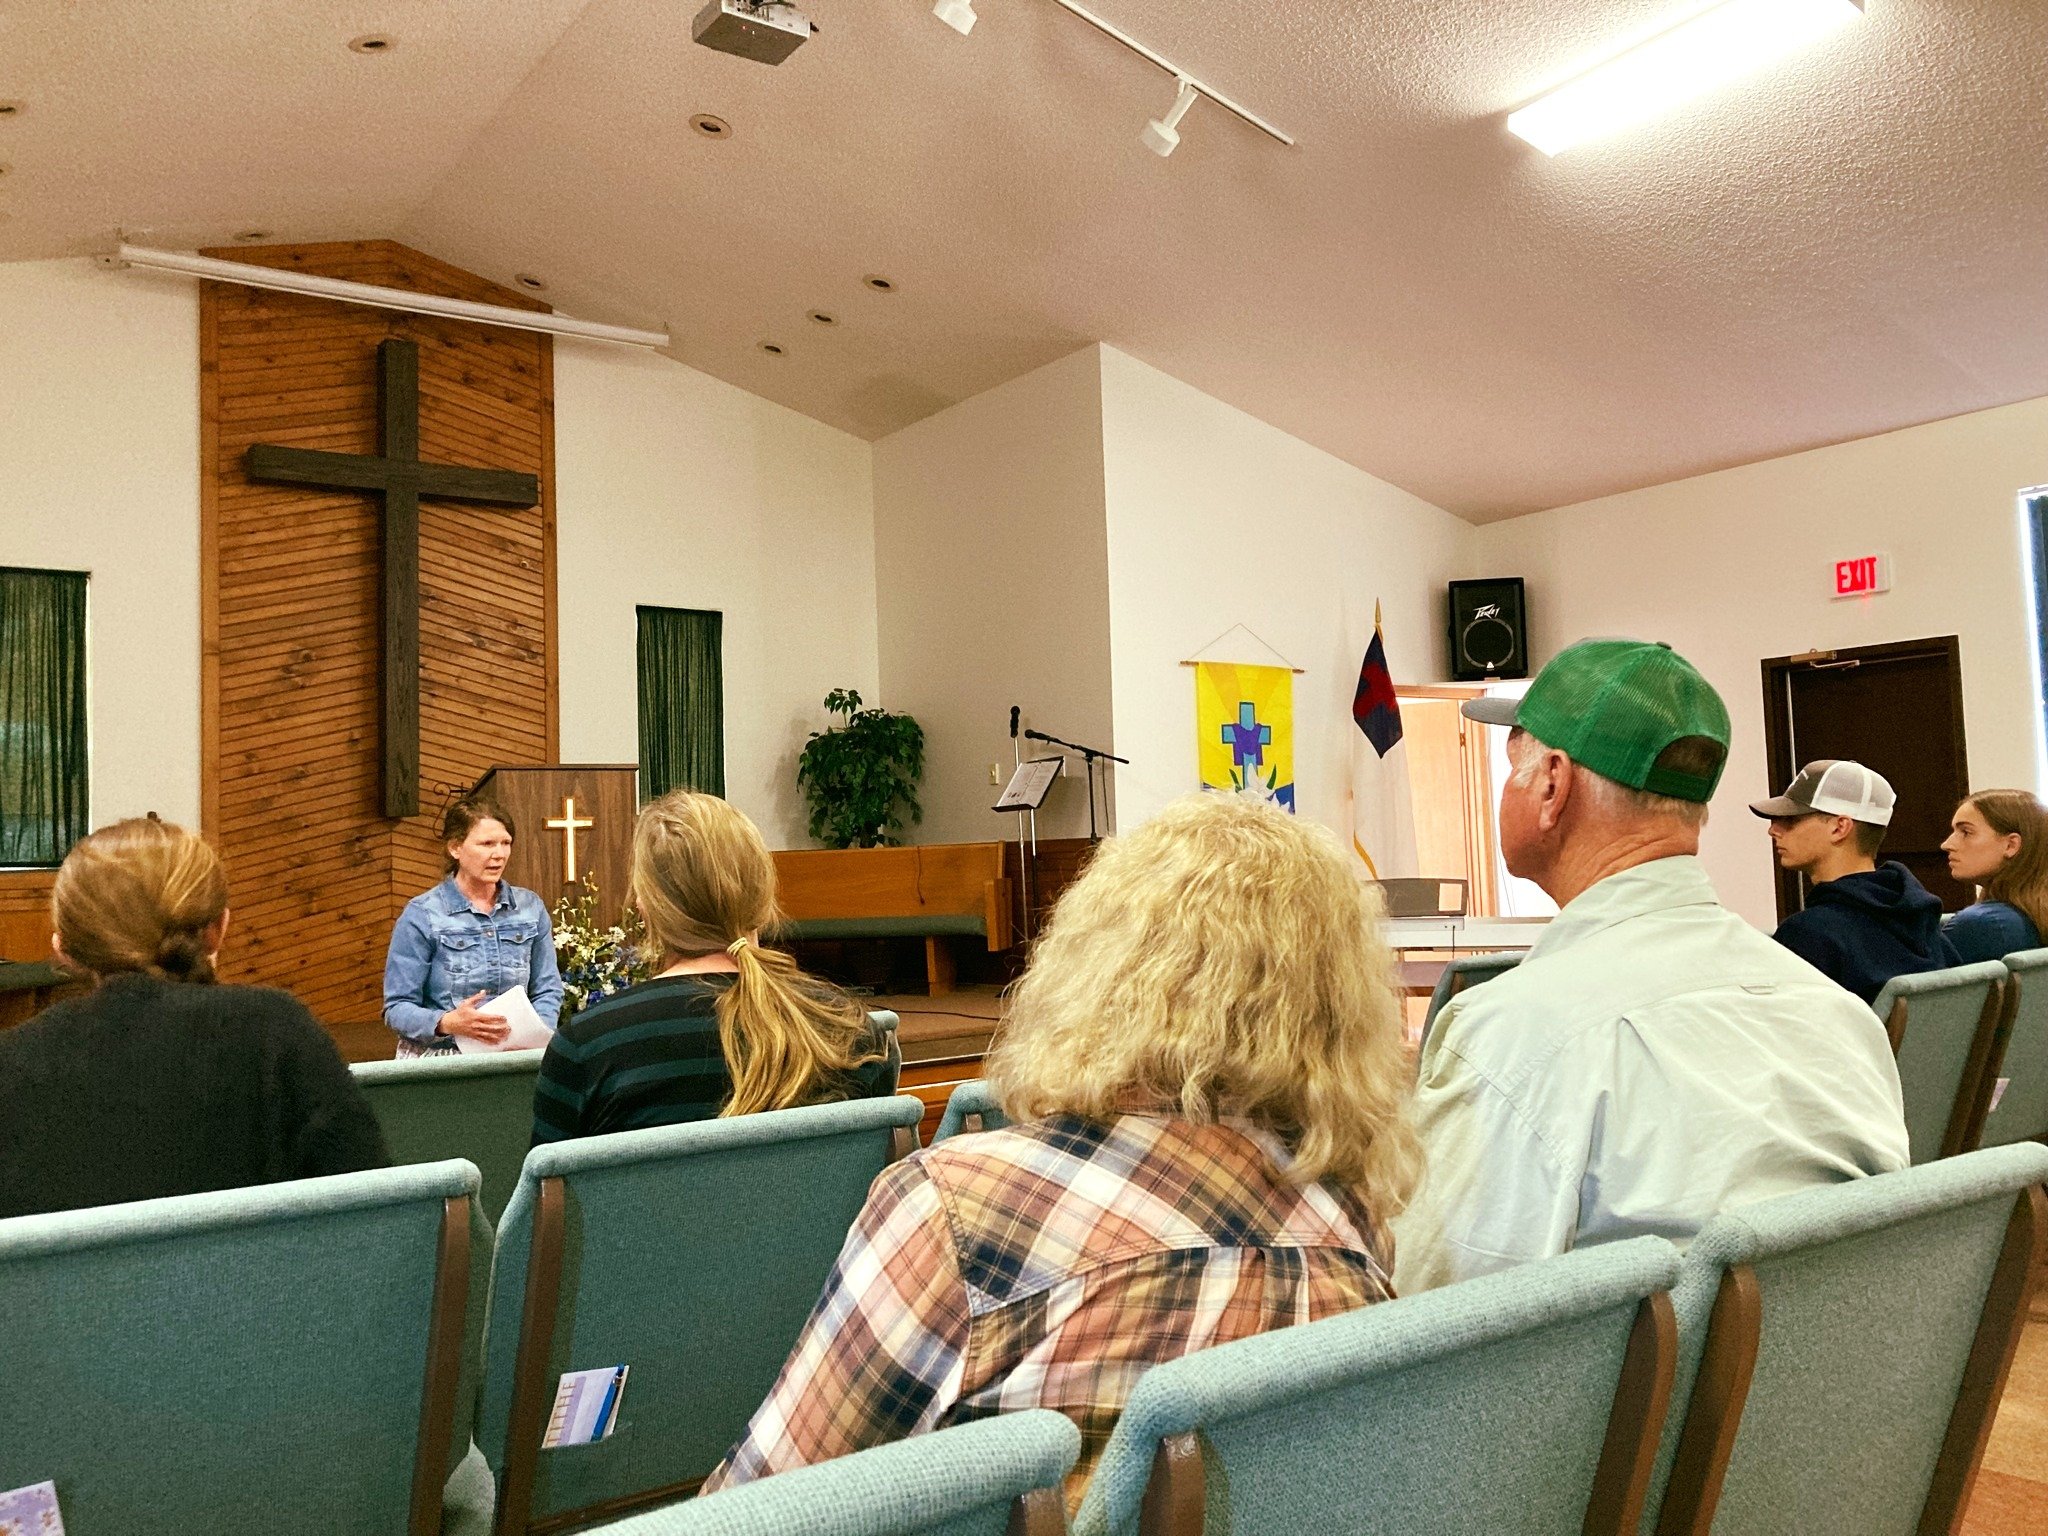 Thanks to everyone who attended our monthly informational meeting! Be sure to join us next month to hear from a great speaker- more info coming soon! #gvrtl #prolifemontana